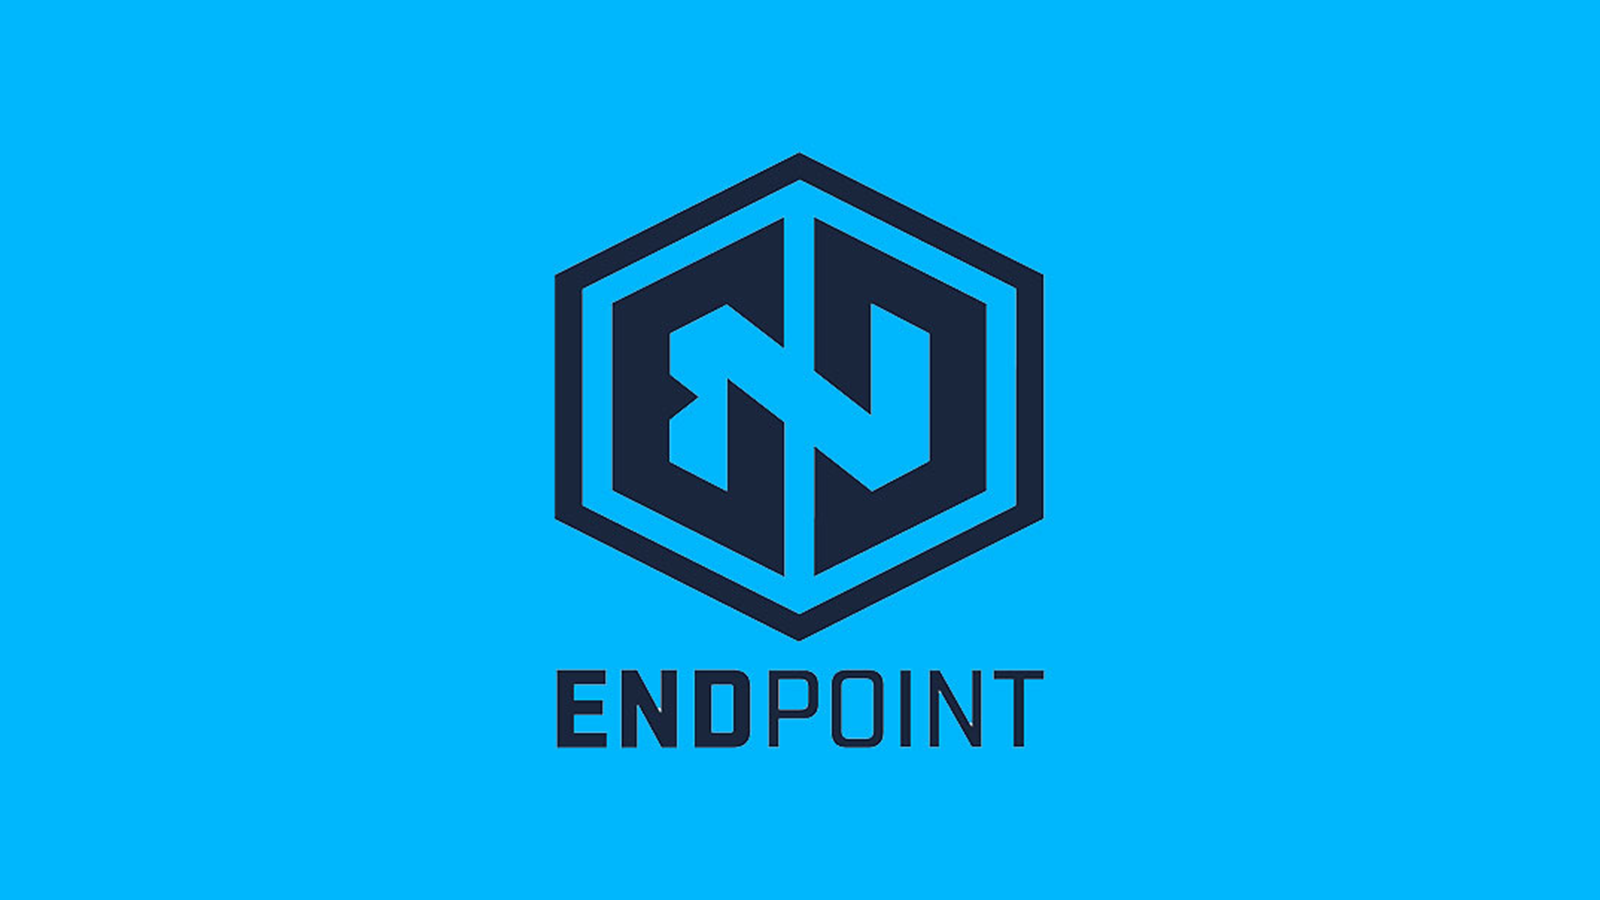 UK Counter-Strike: Endpoint Qualifies, Viperio's Departure